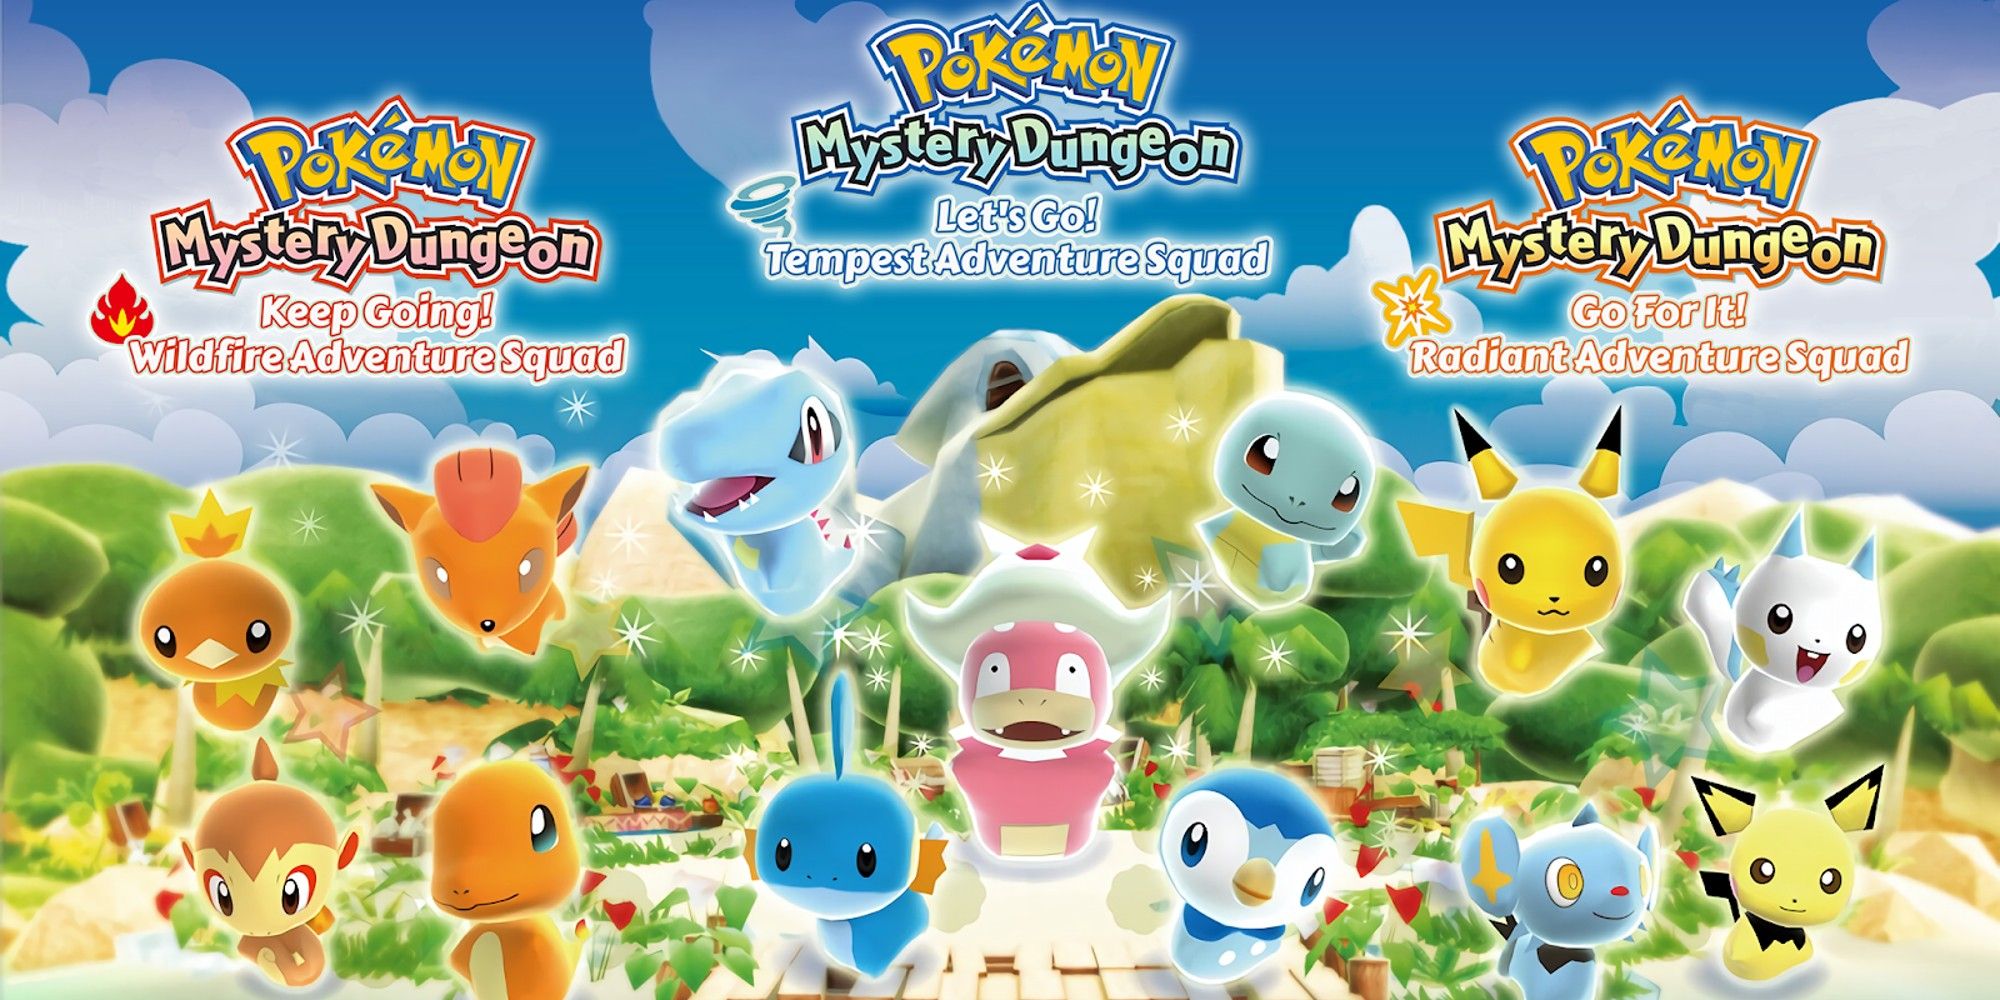 The cover art for Pokémon Mystery Dungeon Bokentai includes several playable Pokémon models and the game's logo.